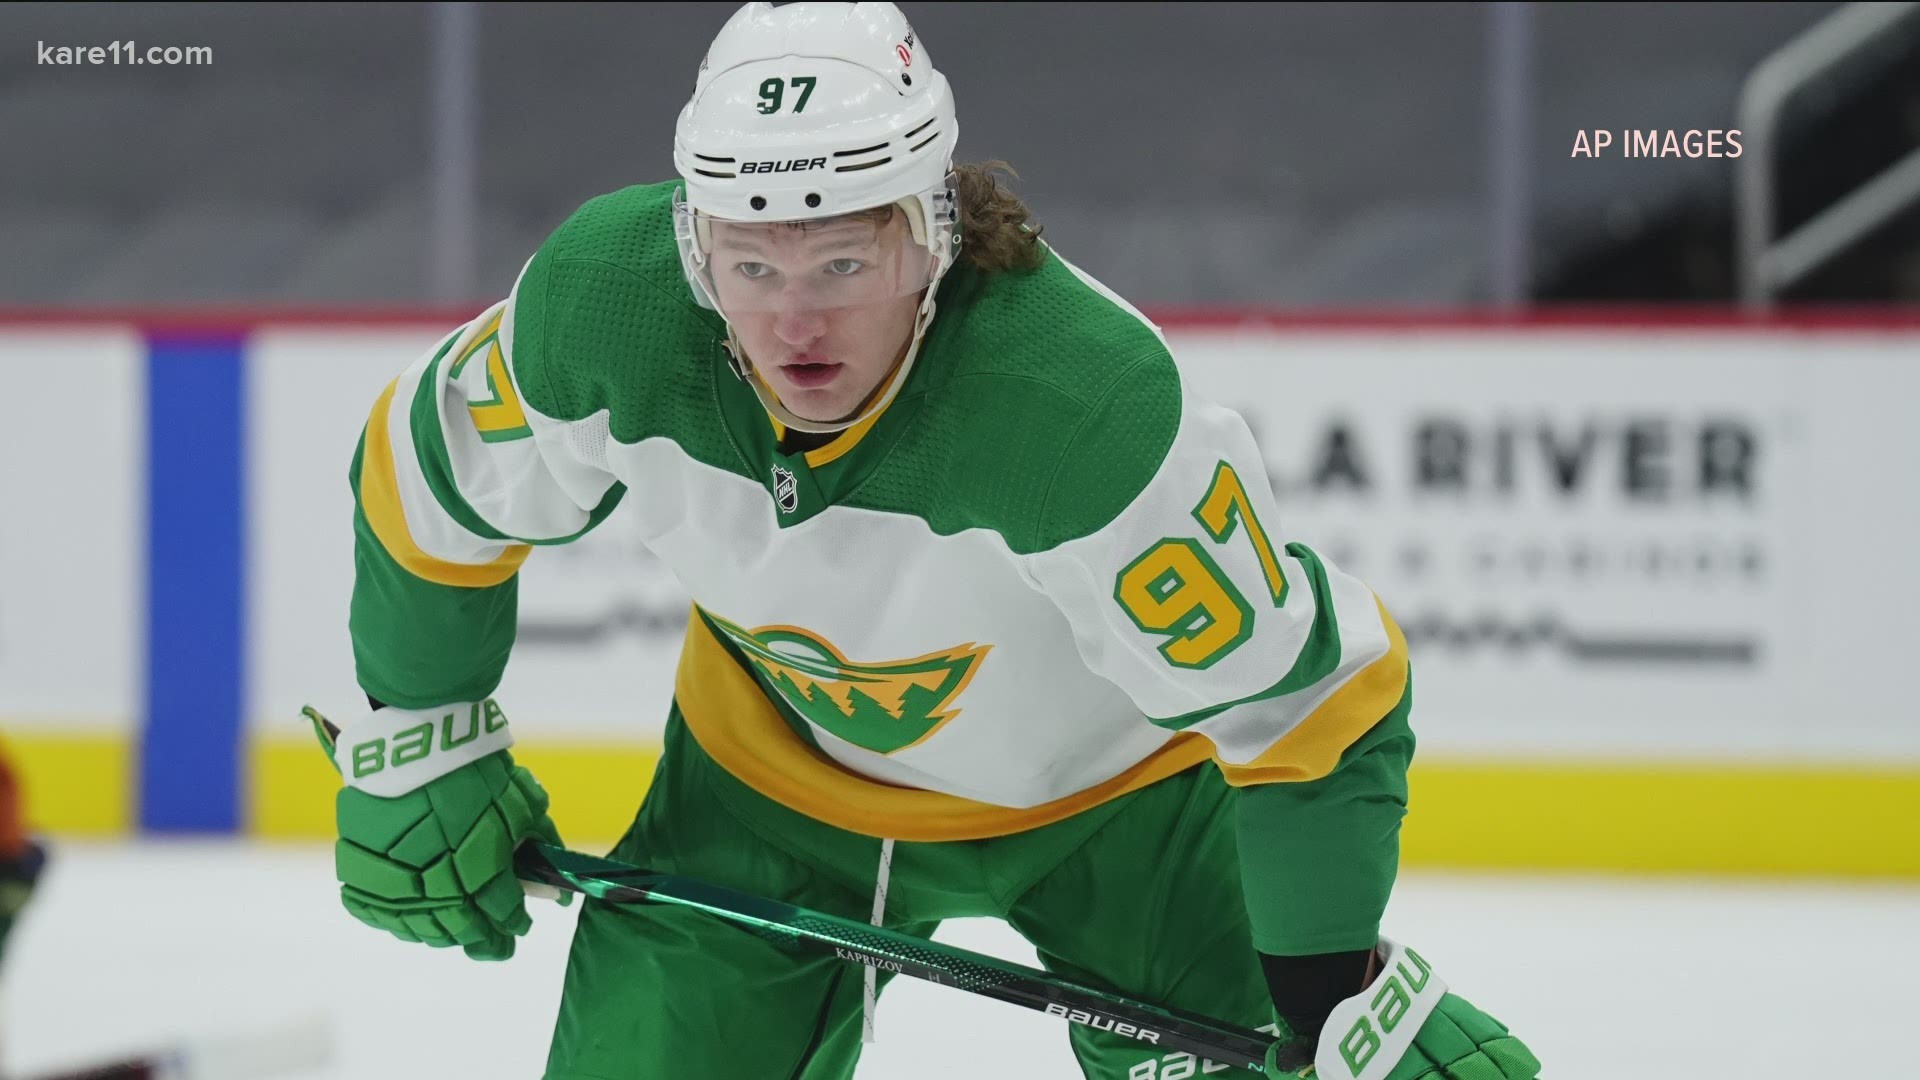 It could be an interesting offseason for the Minnesota Wild as they look to build around some of their young rising stars.